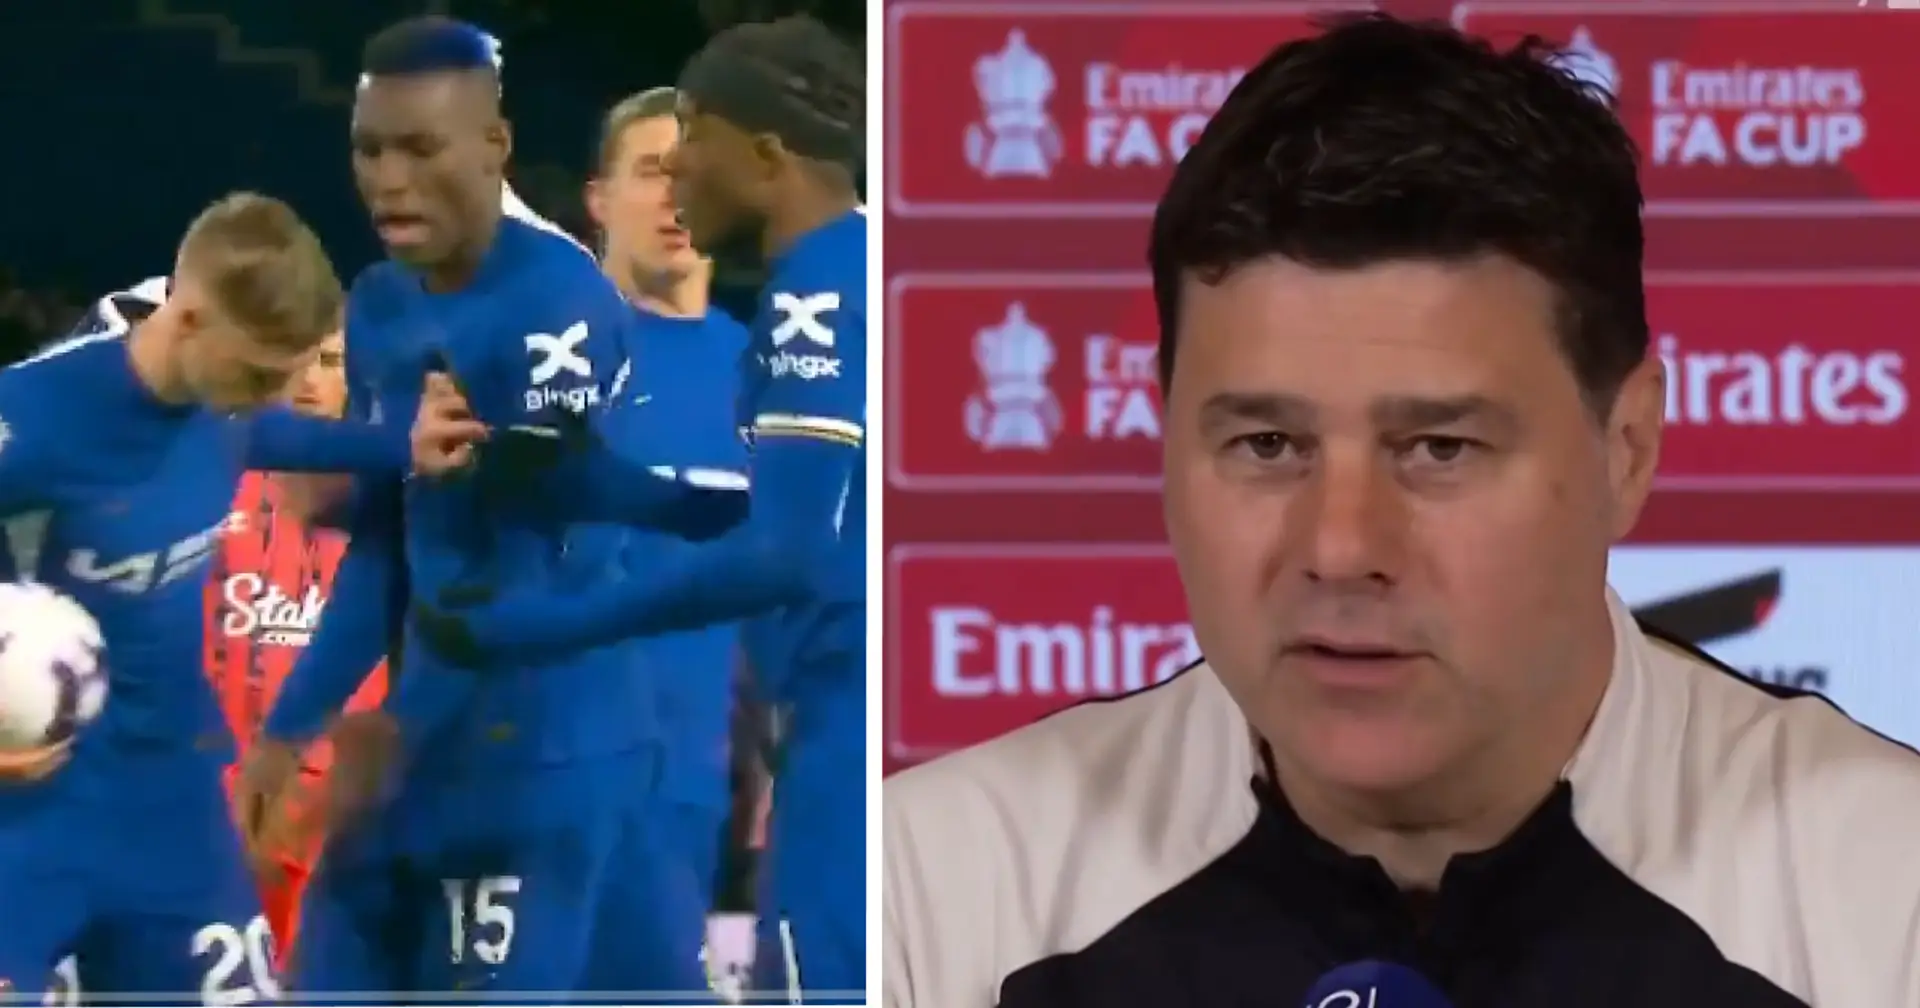 'Sporting directors were involved': Pochettino reveals details of team meeting over penalty drama